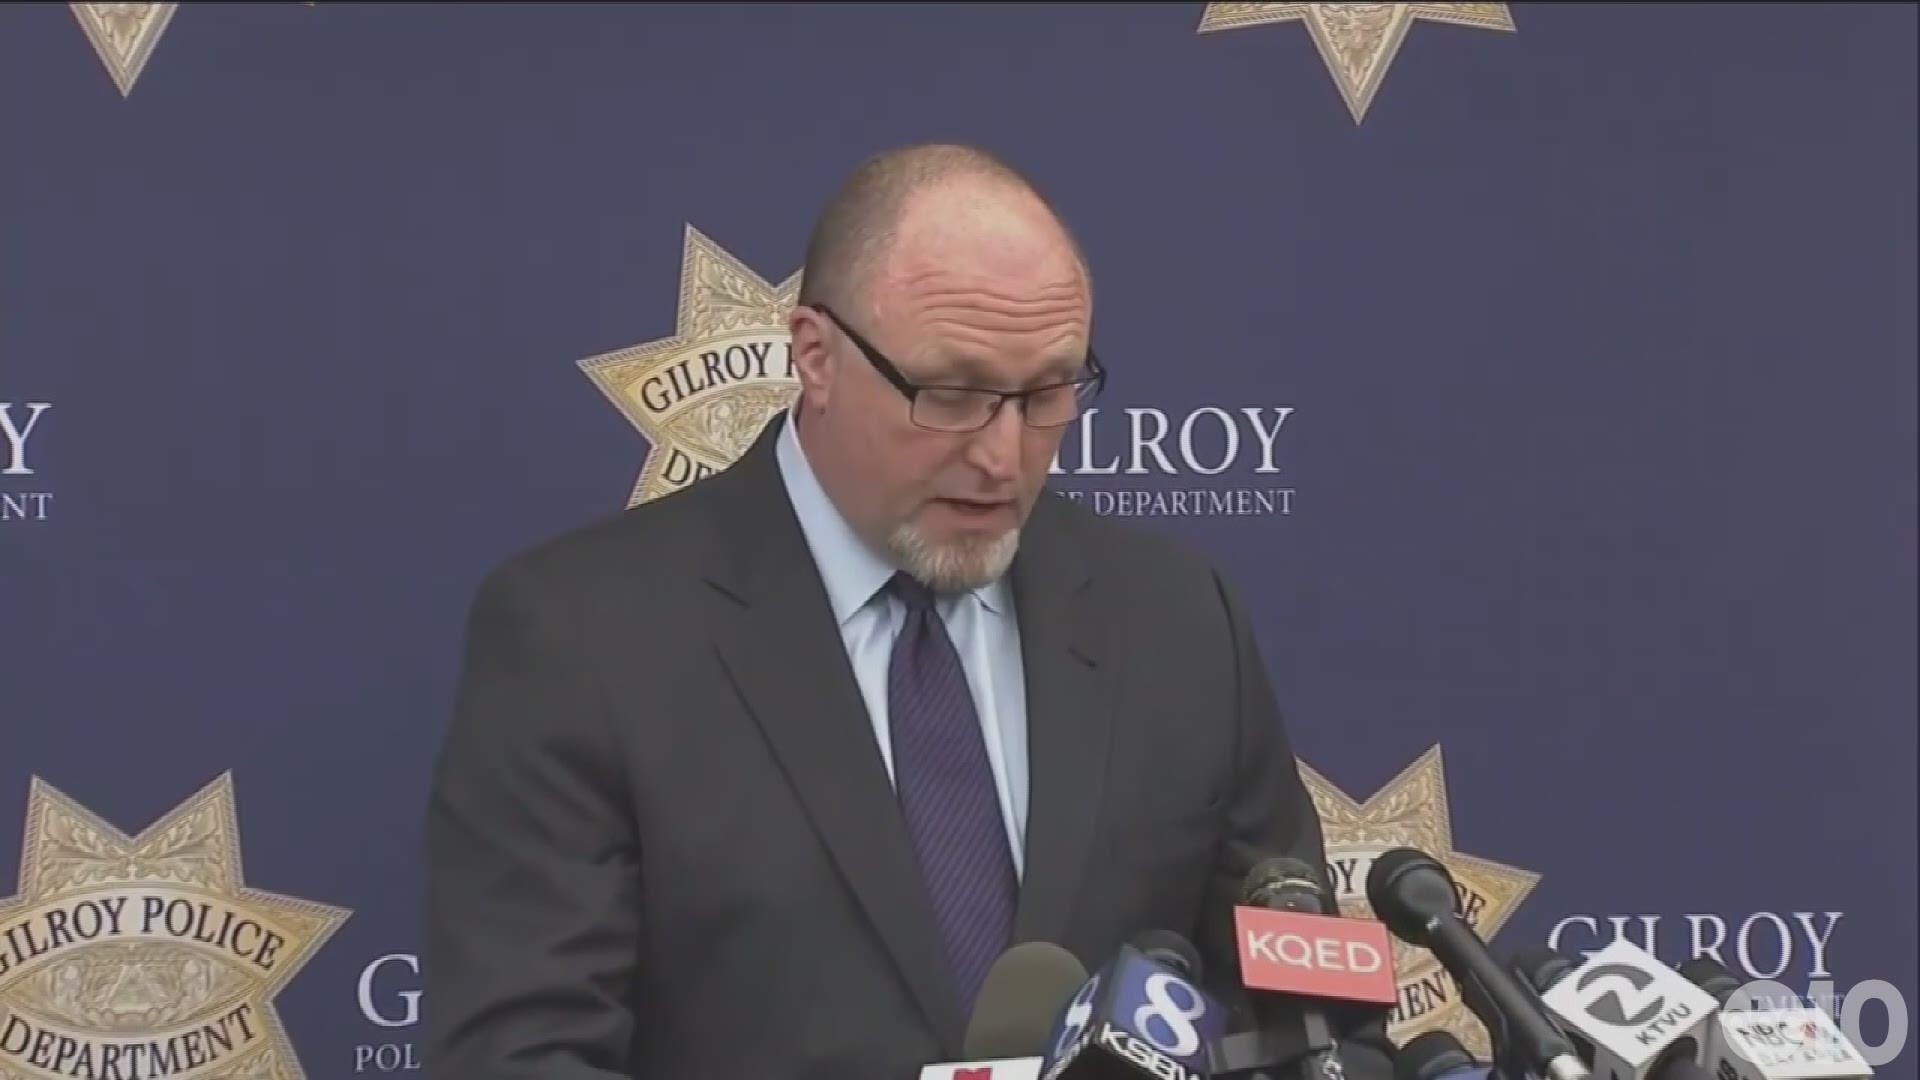 Special Agent John Bennett with the FBI explains why a domestic terrorism case has been opened against the Gilroy Garlic Festival shooter.